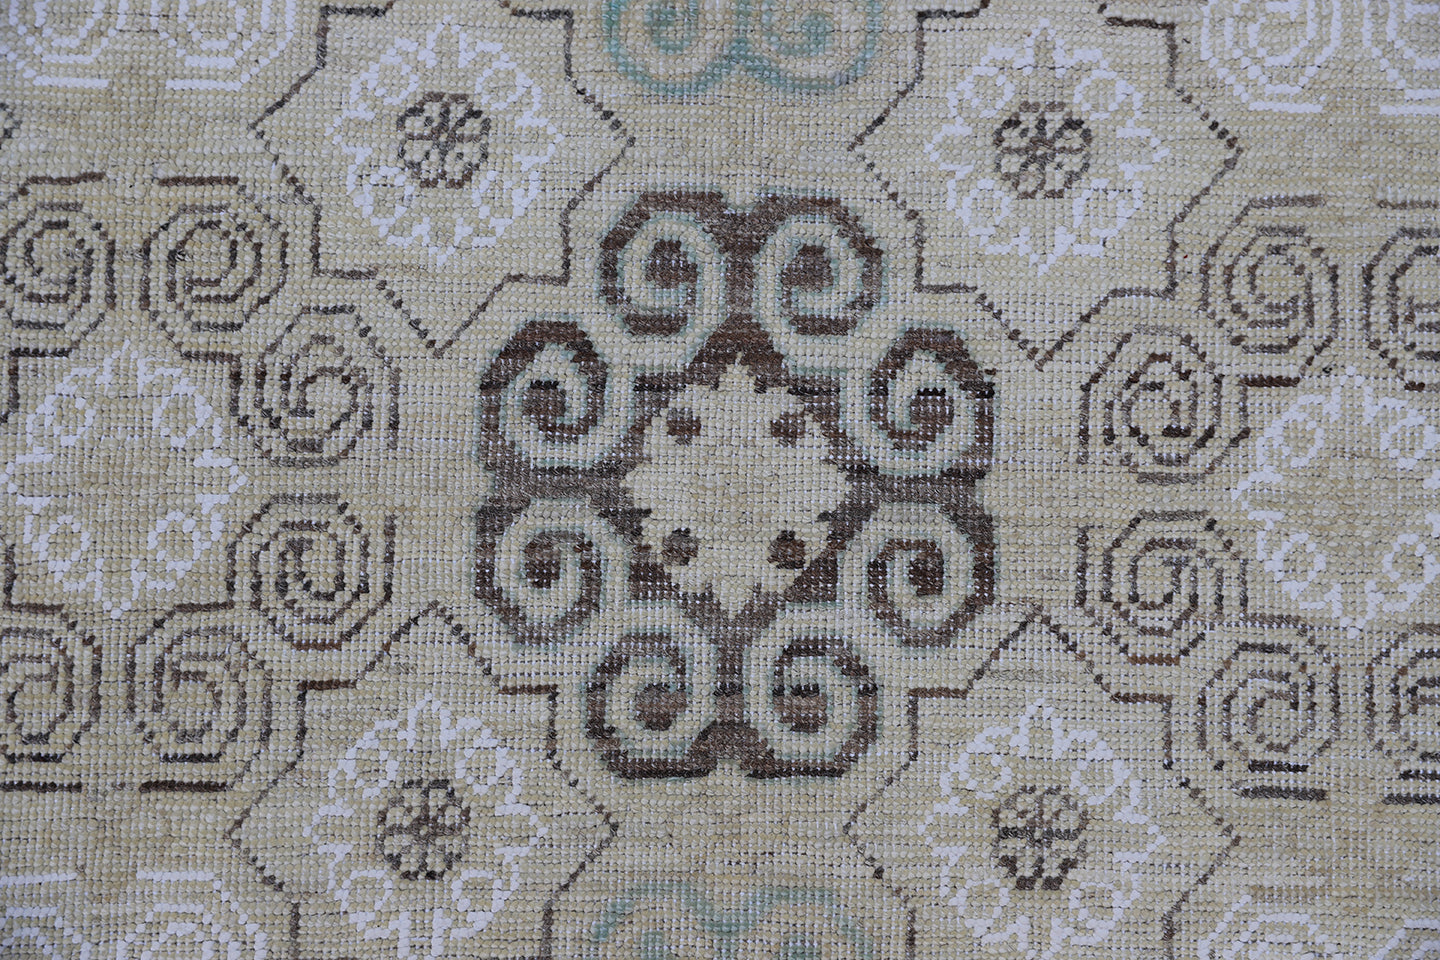 10'x13' Ariana Khotan Hand Knotted Patina Rug in Beige and Blue Colors